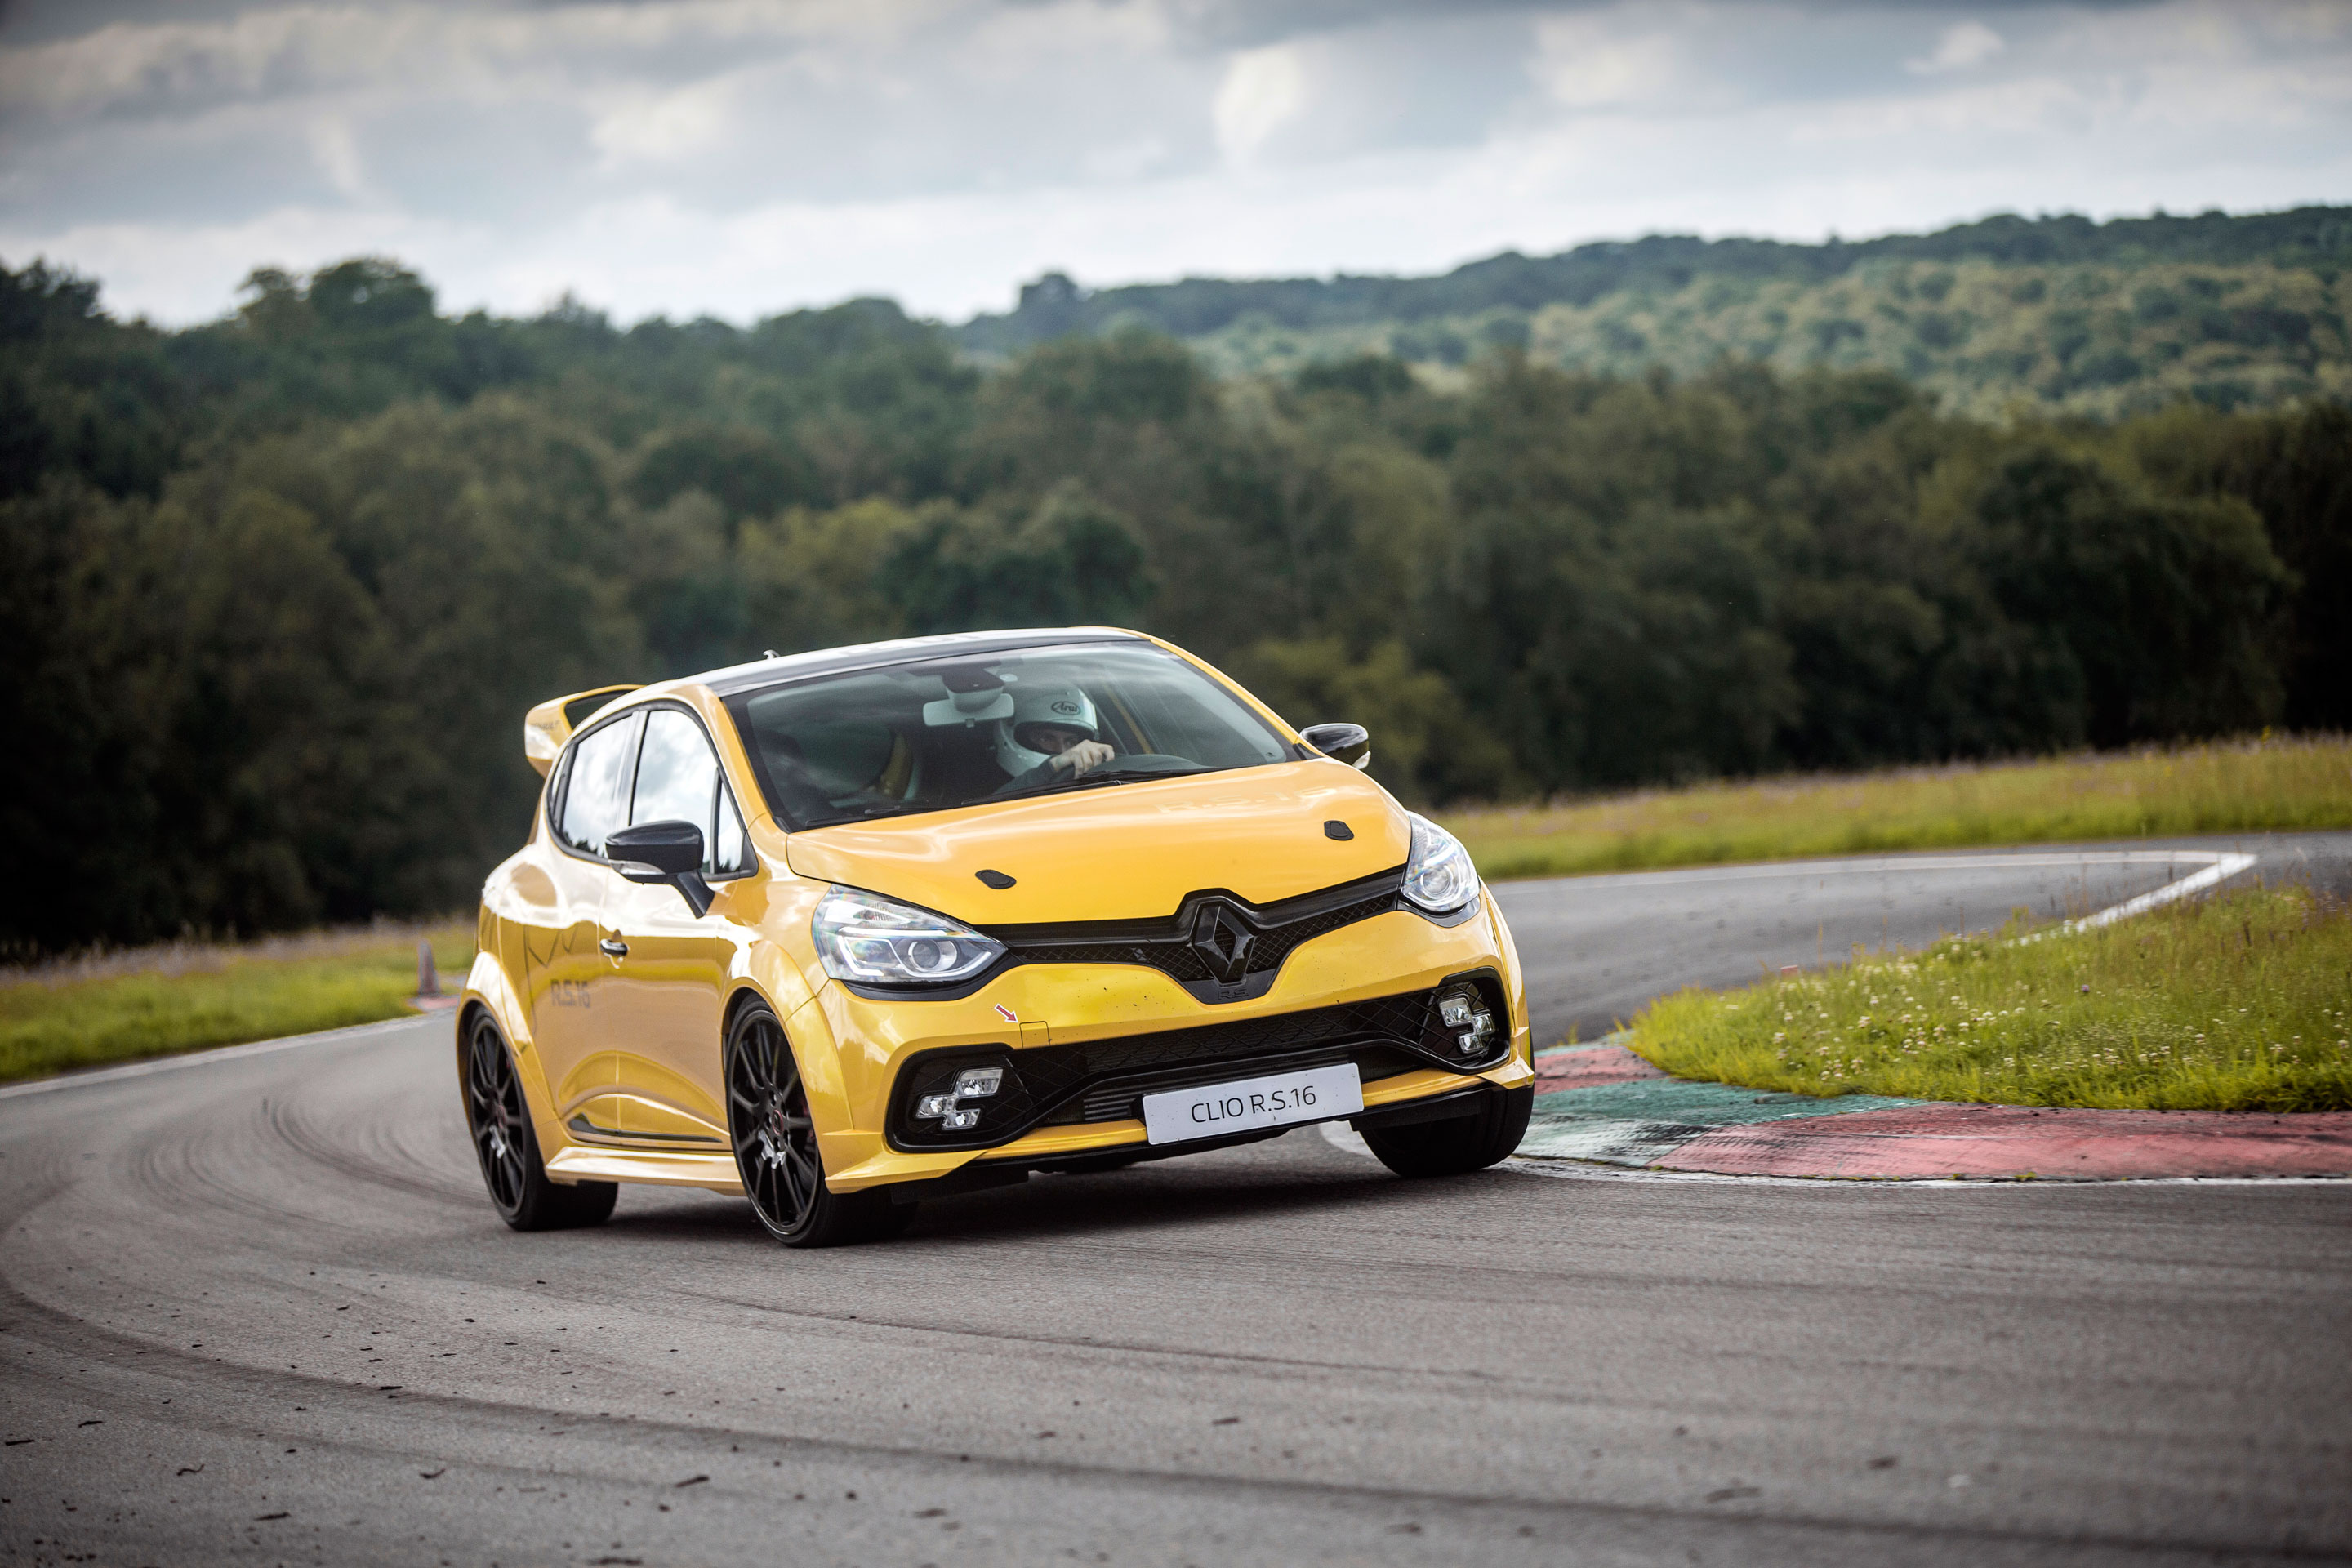 This is the 271bhp Renault Sport Clio RS16